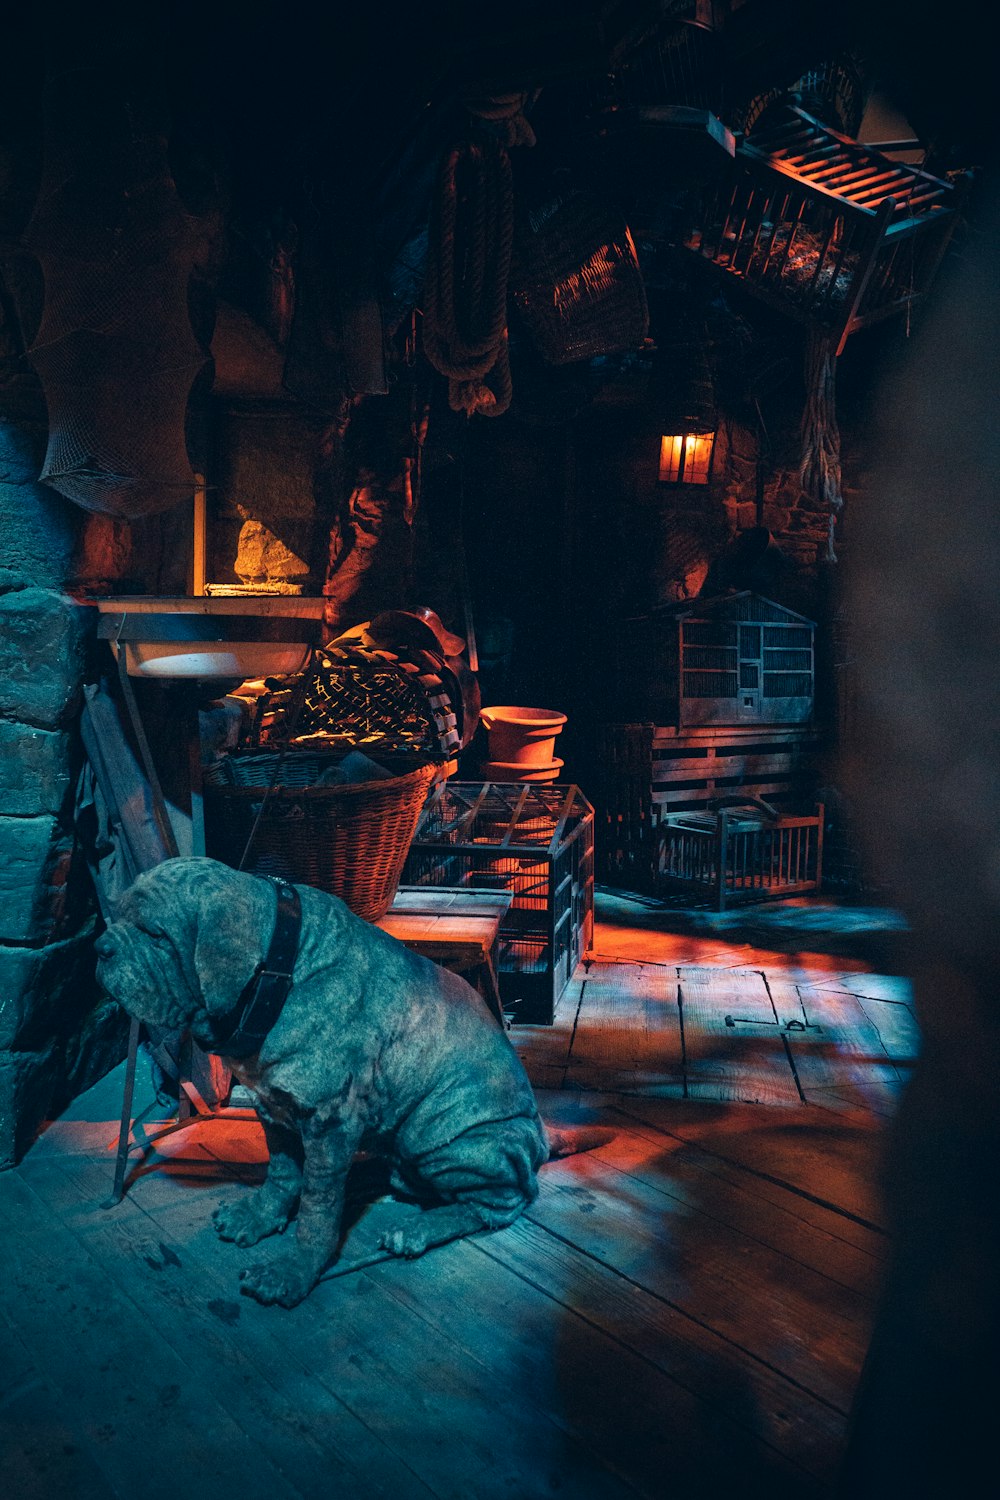 a dog sitting on a wooden floor in a dark room